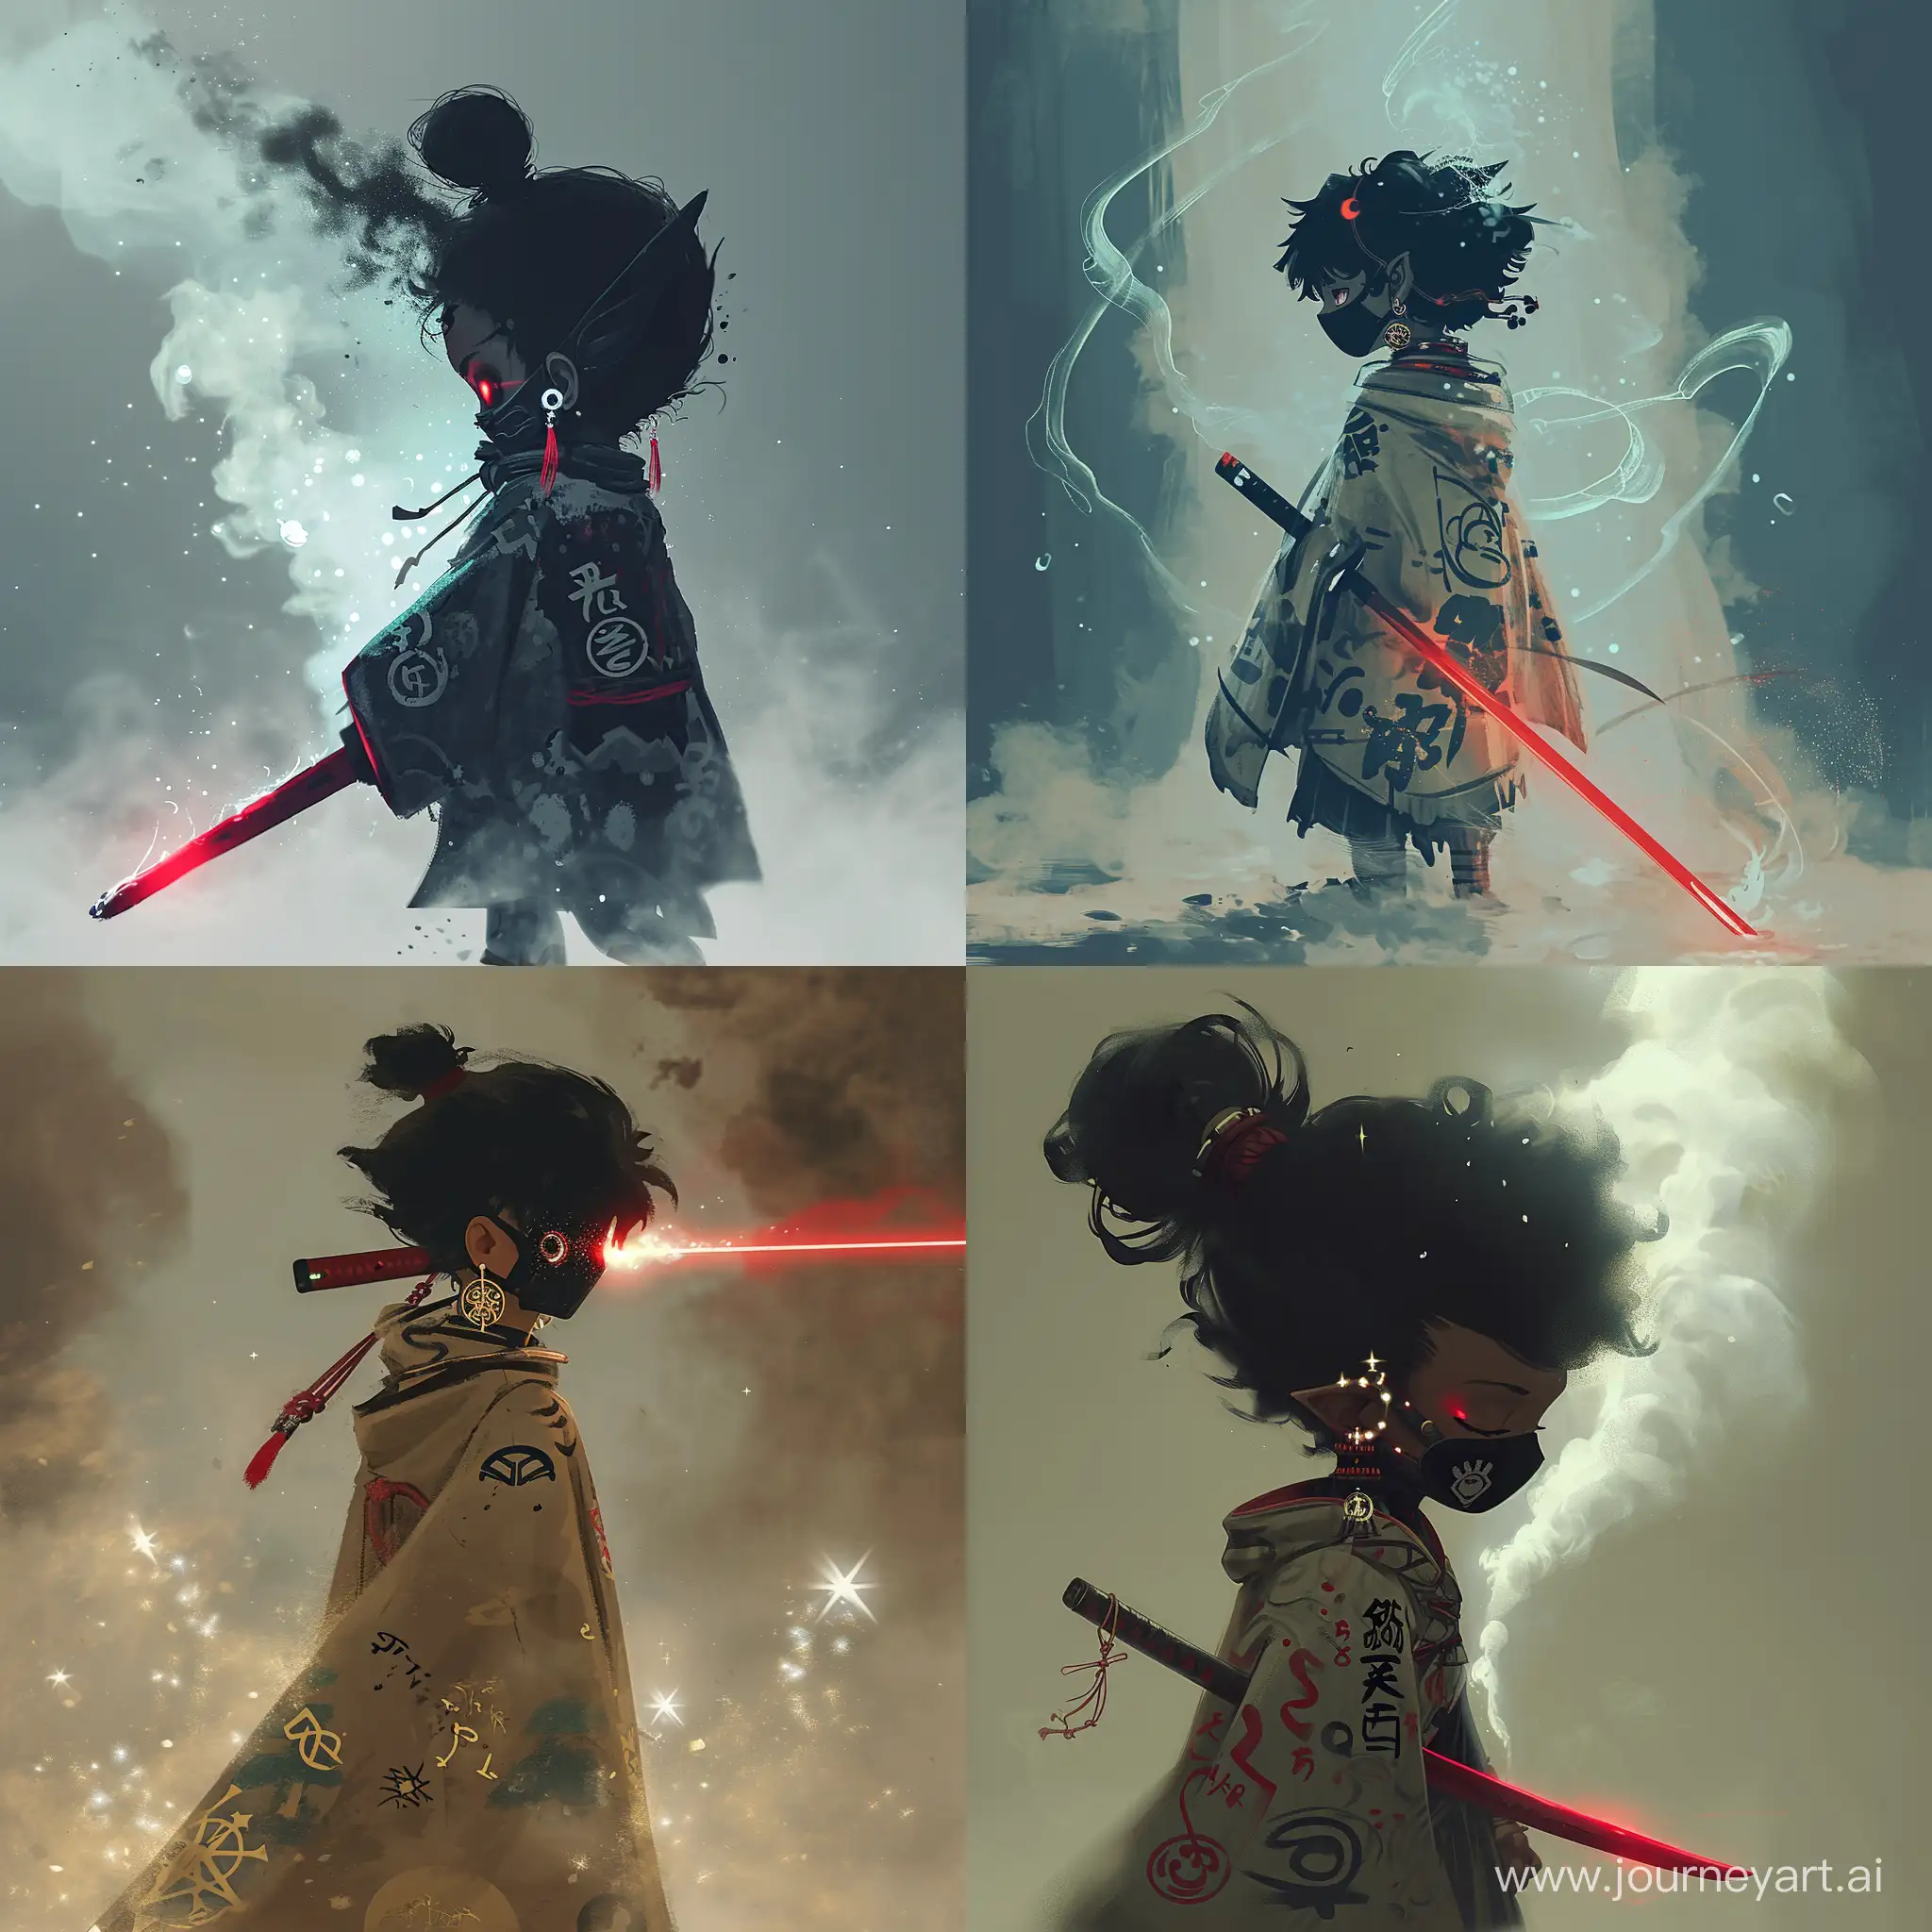 Magical-Japanese-Demon-Teenager-with-Dark-Red-Sword-in-Anime-Style